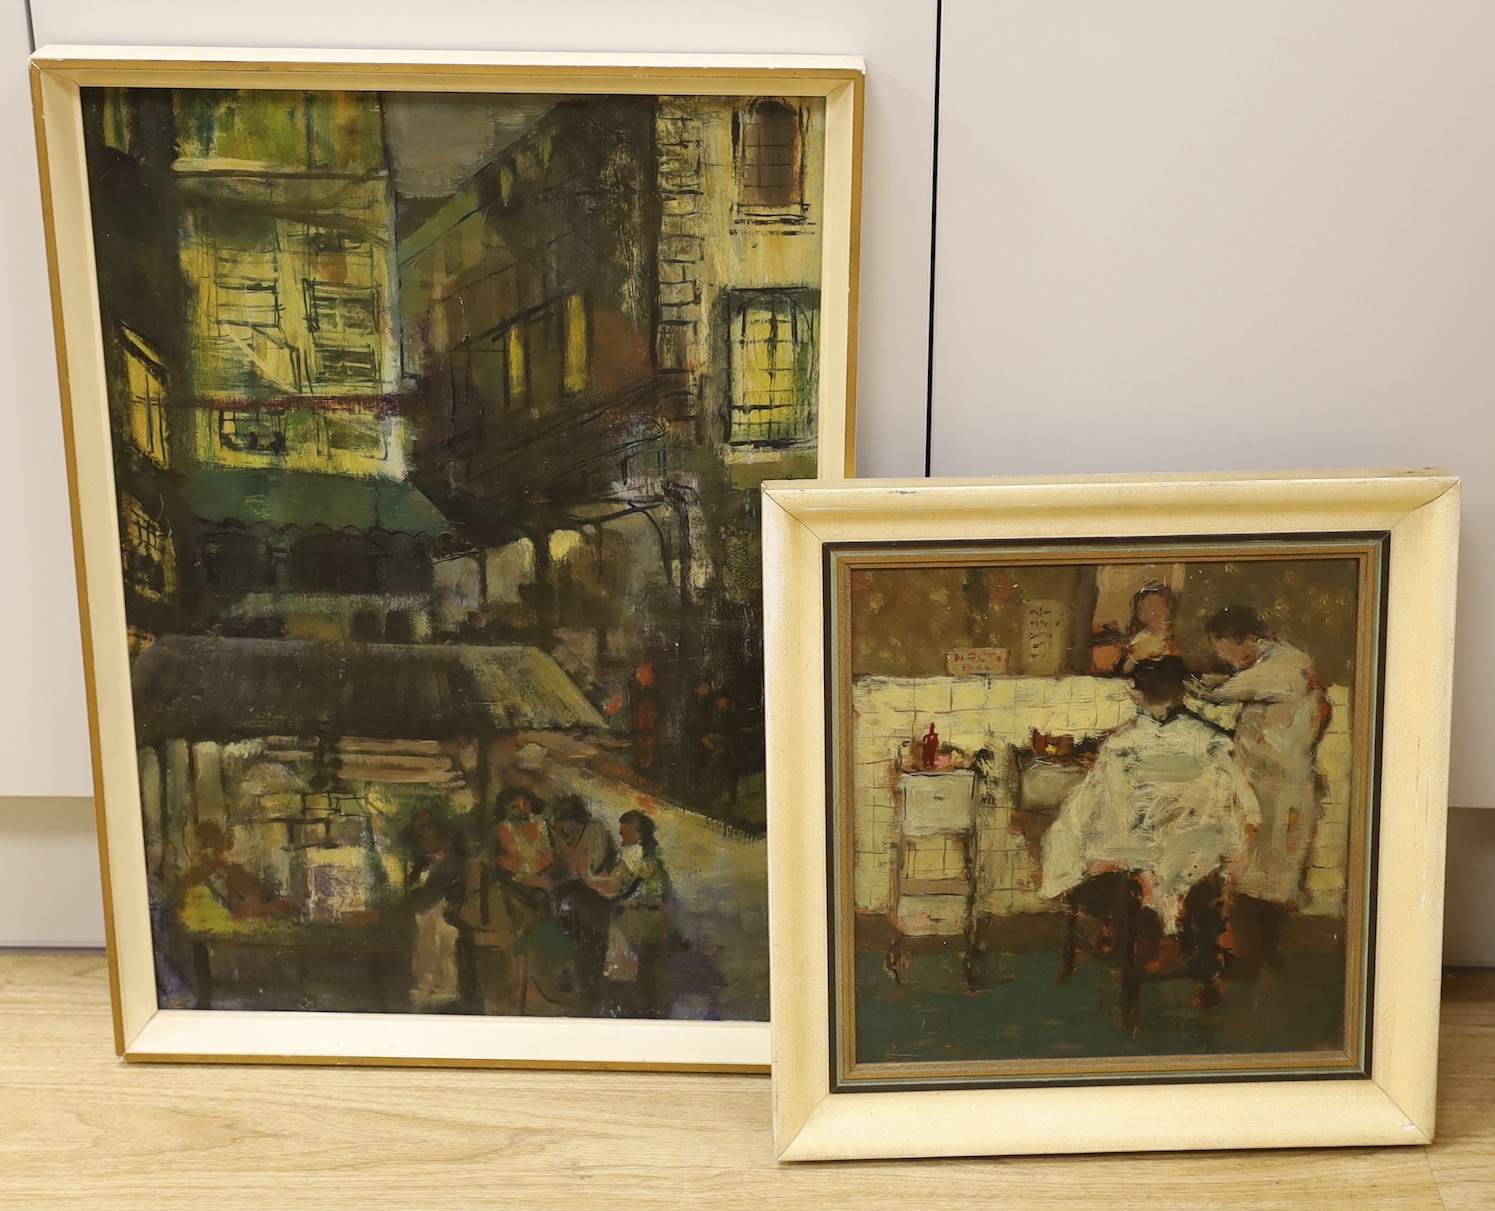 John Taylor (20th century British), oil on board, Street market, titled label verso, dated 1958, 58 x 41cms and another by the artist - Barbershop interior, oil on board, 30 x 20cms. (2)